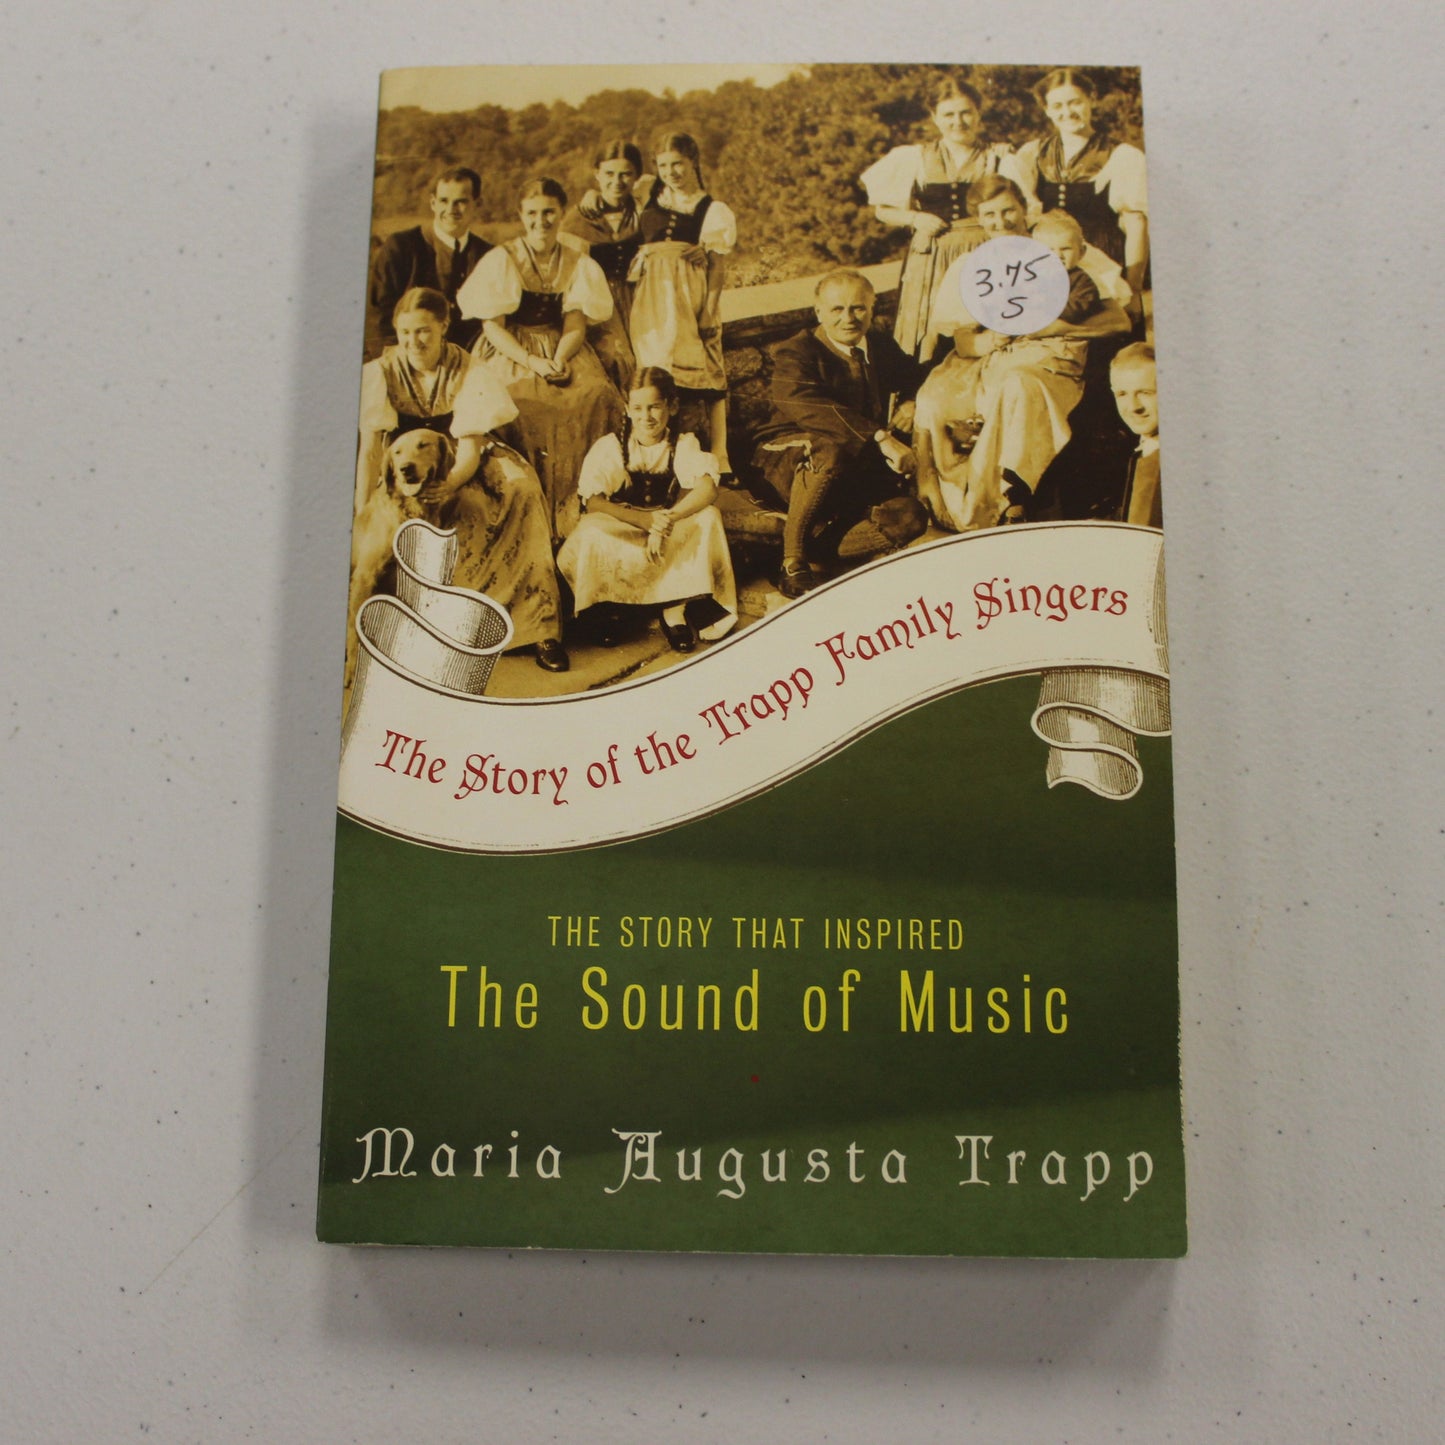 THE STORY OF THE TRAPP FAMILY SINGERS